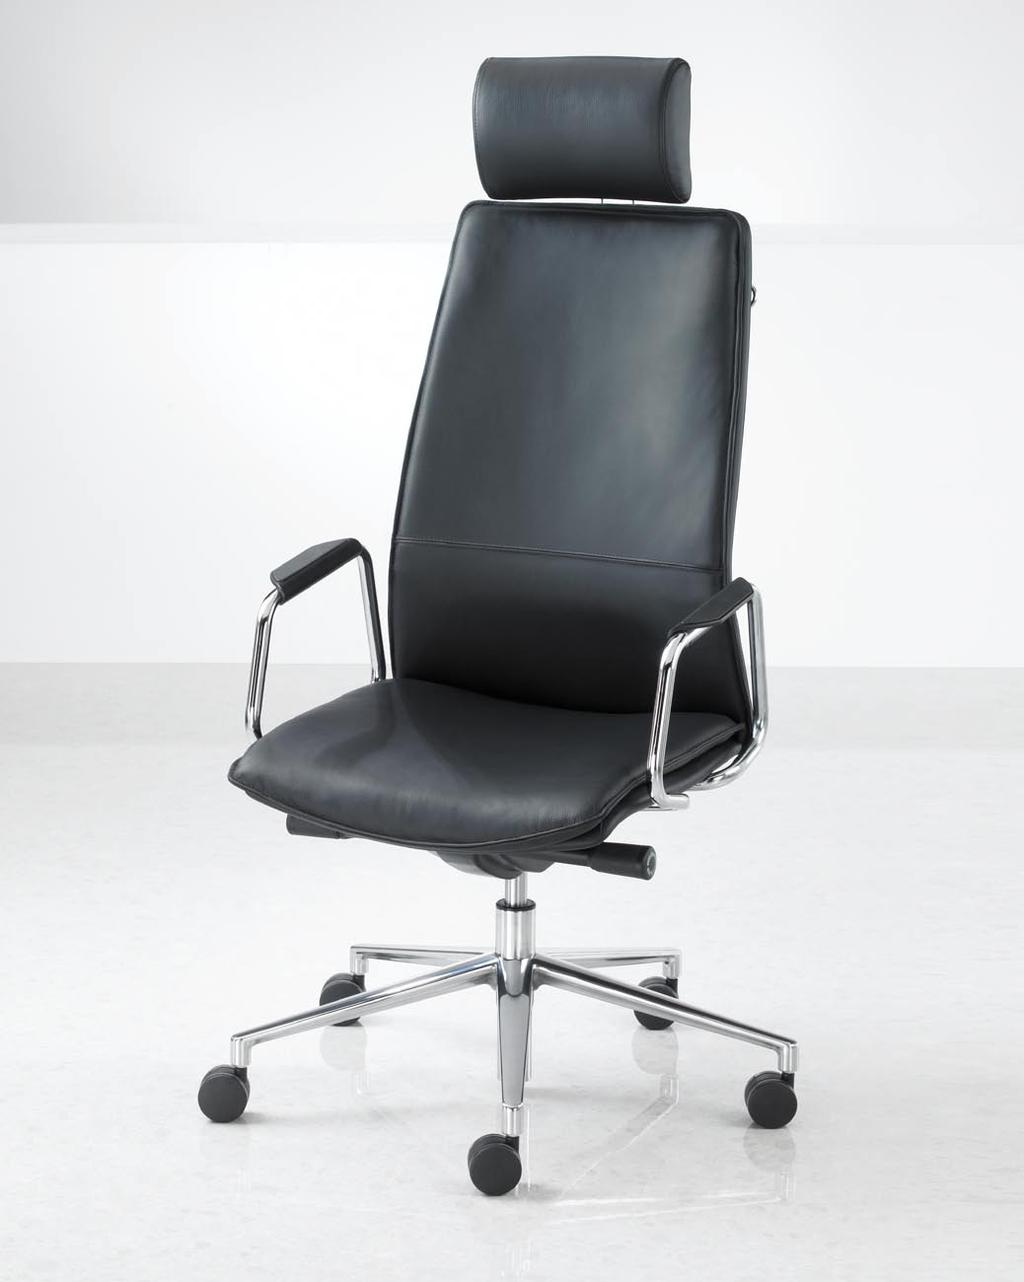 Executive AND CONFERENCE Chairs HBB Executive and Conference Chairs HBB executive working chairs are fitted with a synchro tilt mechanism and are offered in both